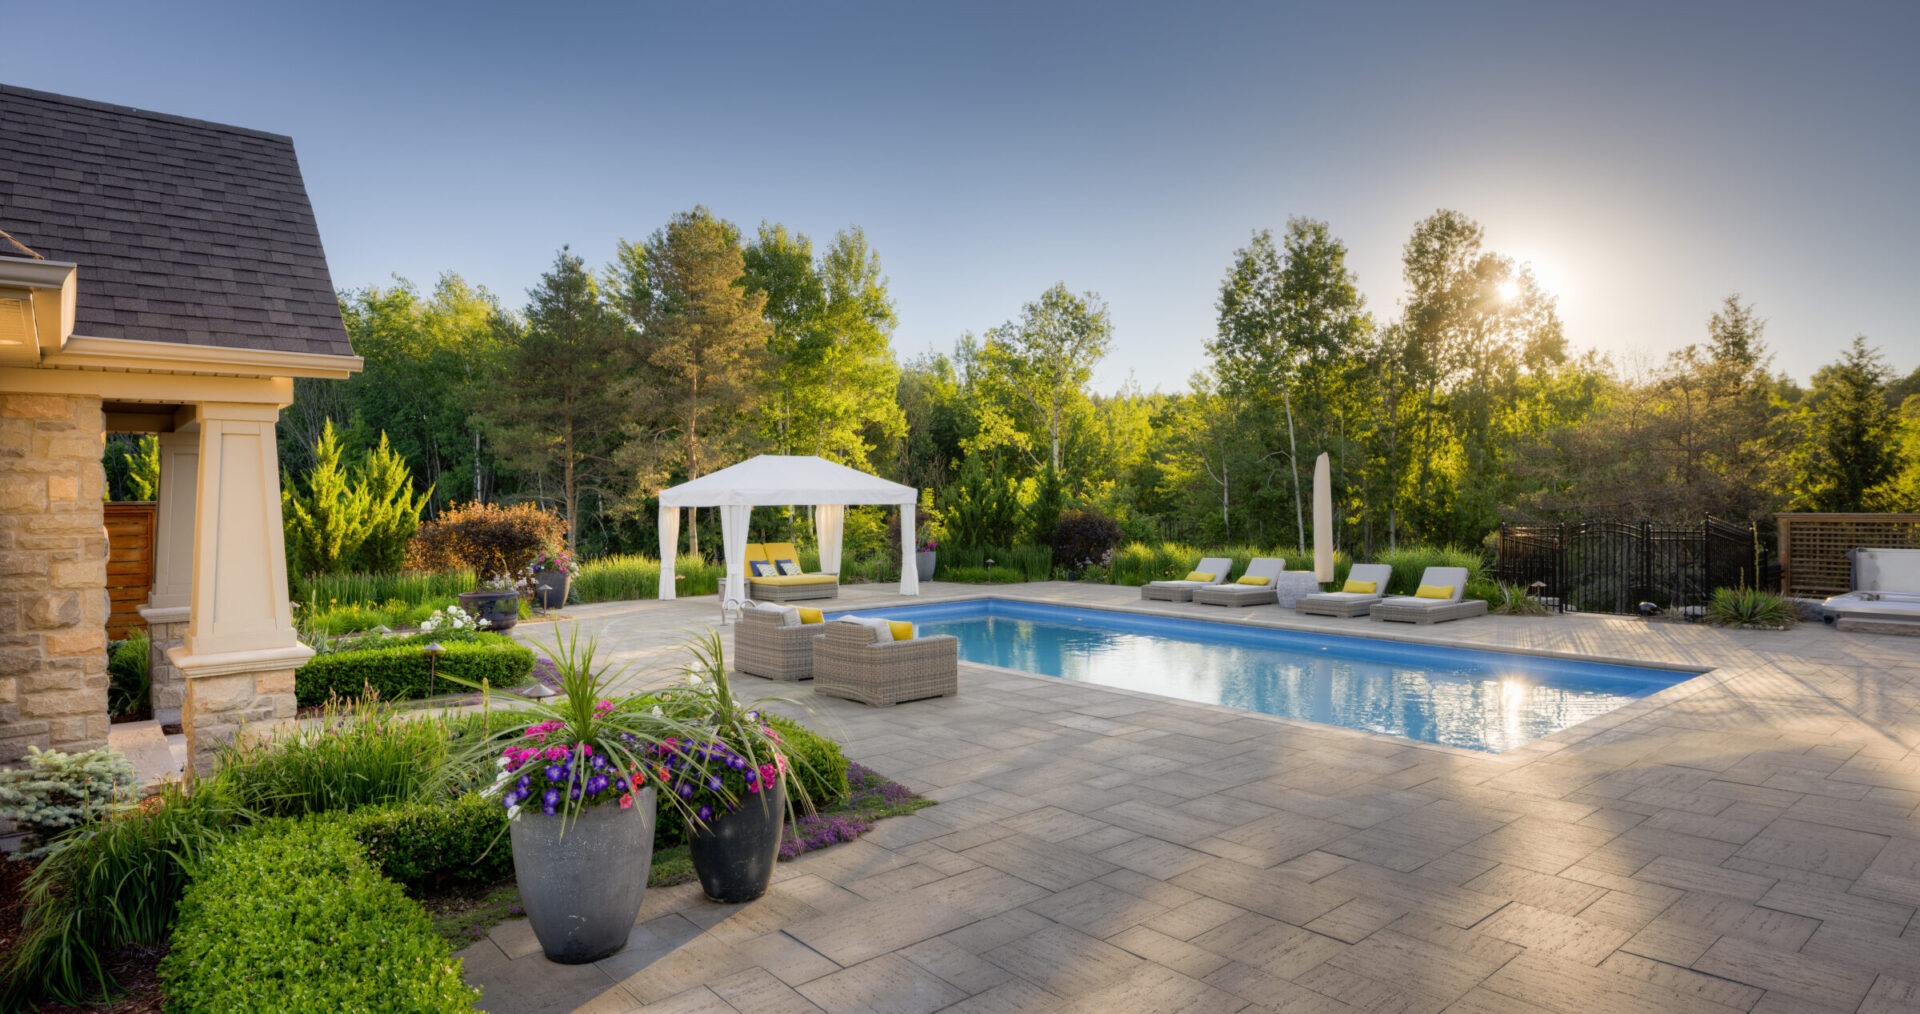 Luxurious backyard at sunset with a swimming pool, a gazebo, sun loungers, lush landscaping, and a clear sky, embodying tranquility and leisure.